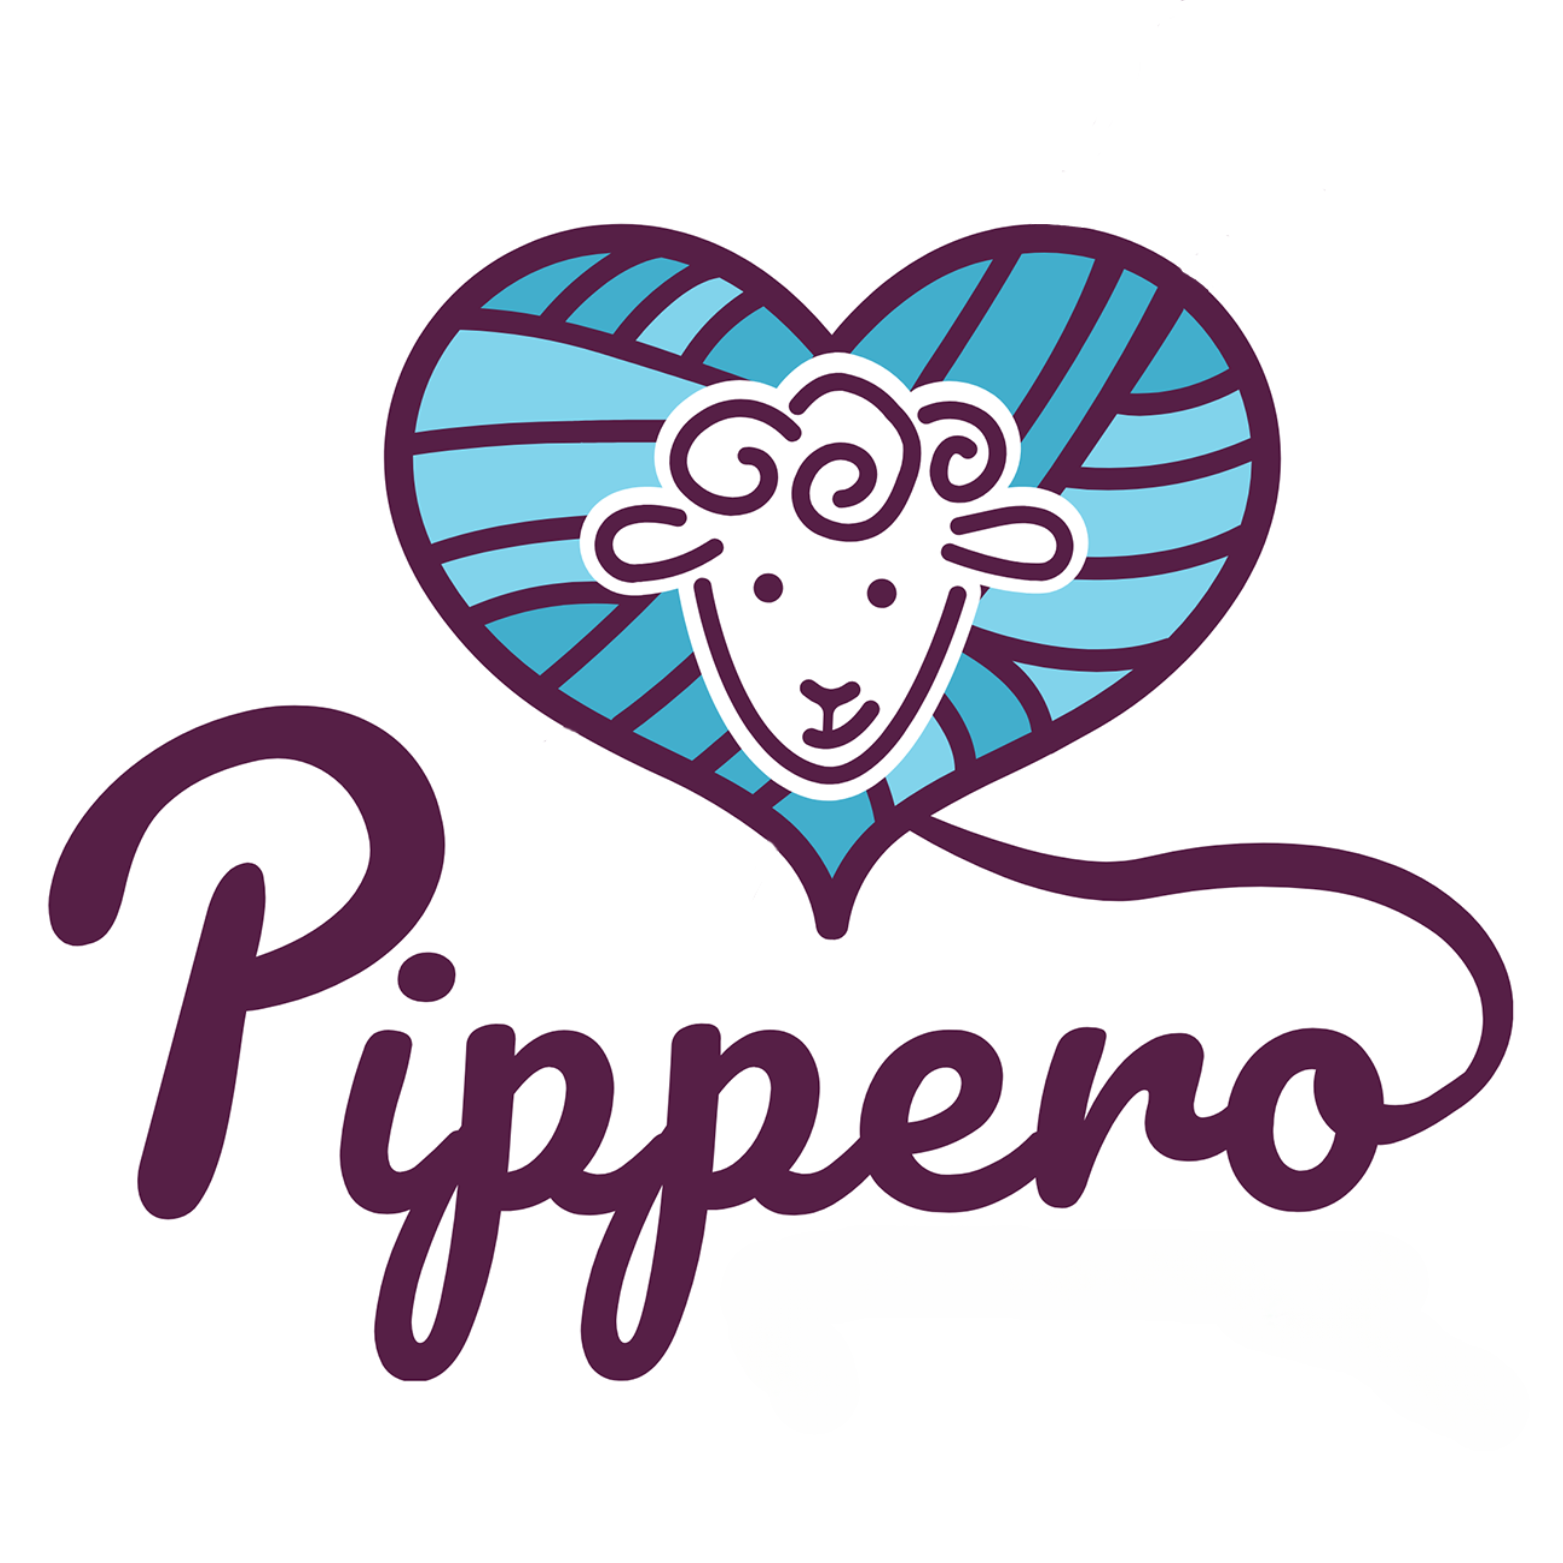 Pippero Products